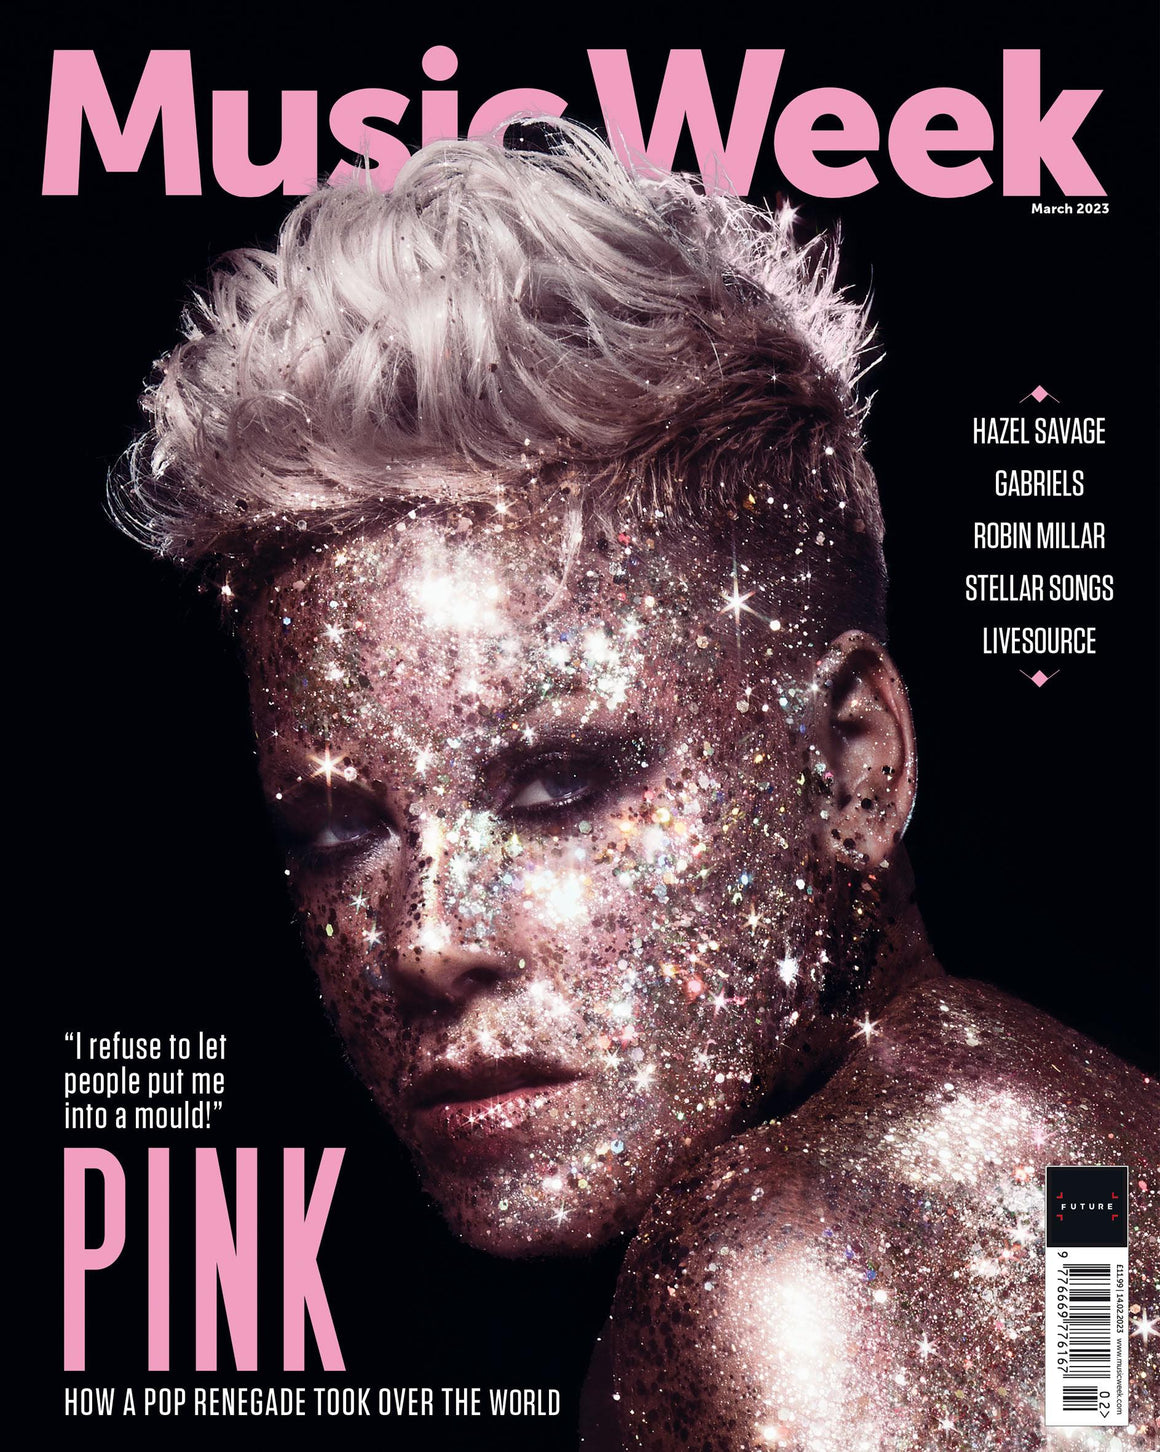 MUSIC WEEK Magazine March 2023 Pink Alecia Beth Moore Cover Interview